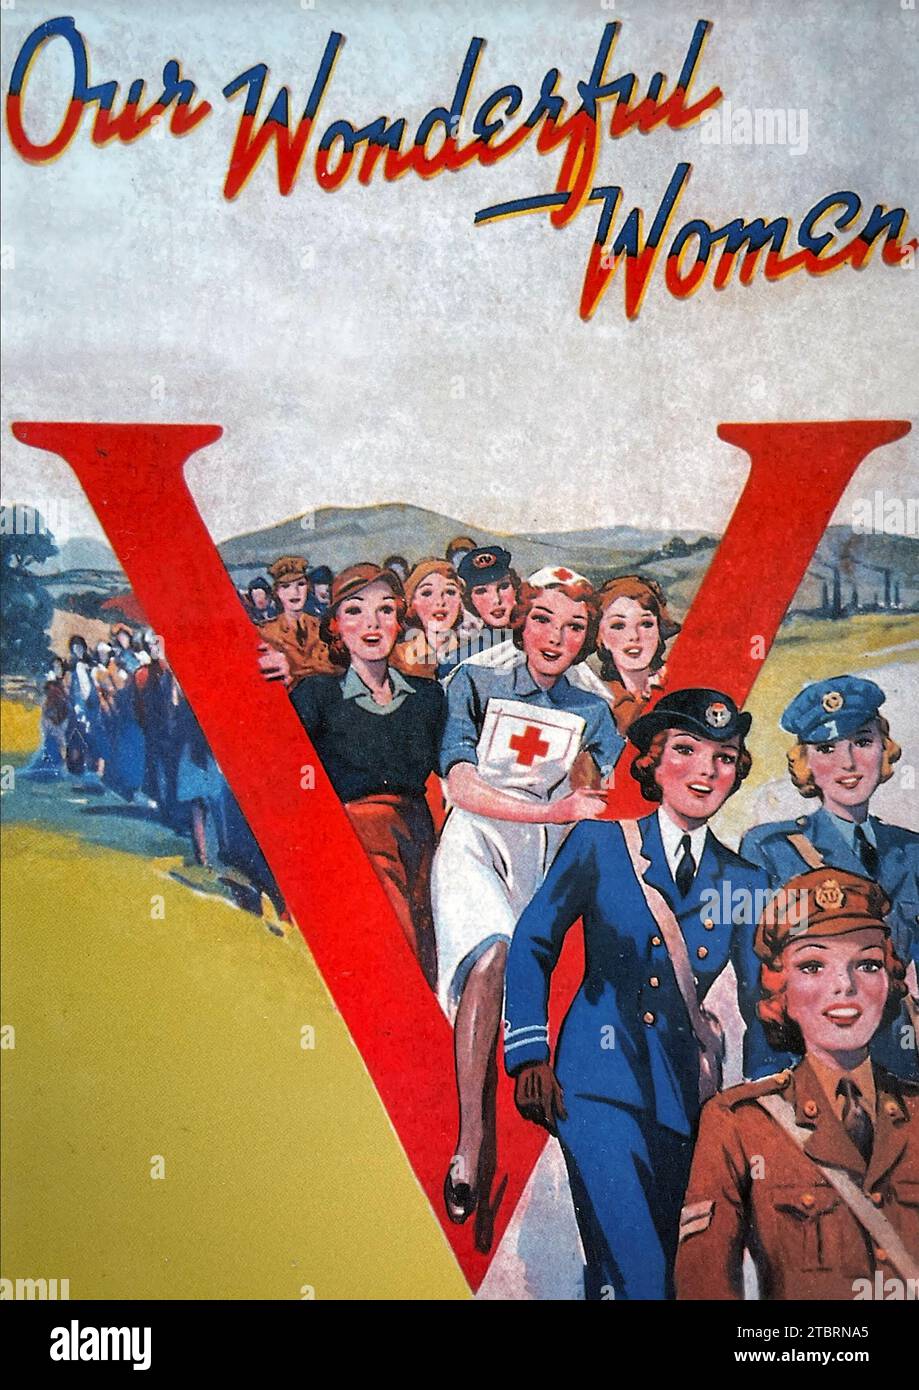 OUR WONDERFUL WOMEN British poster about 1942 Stock Photo